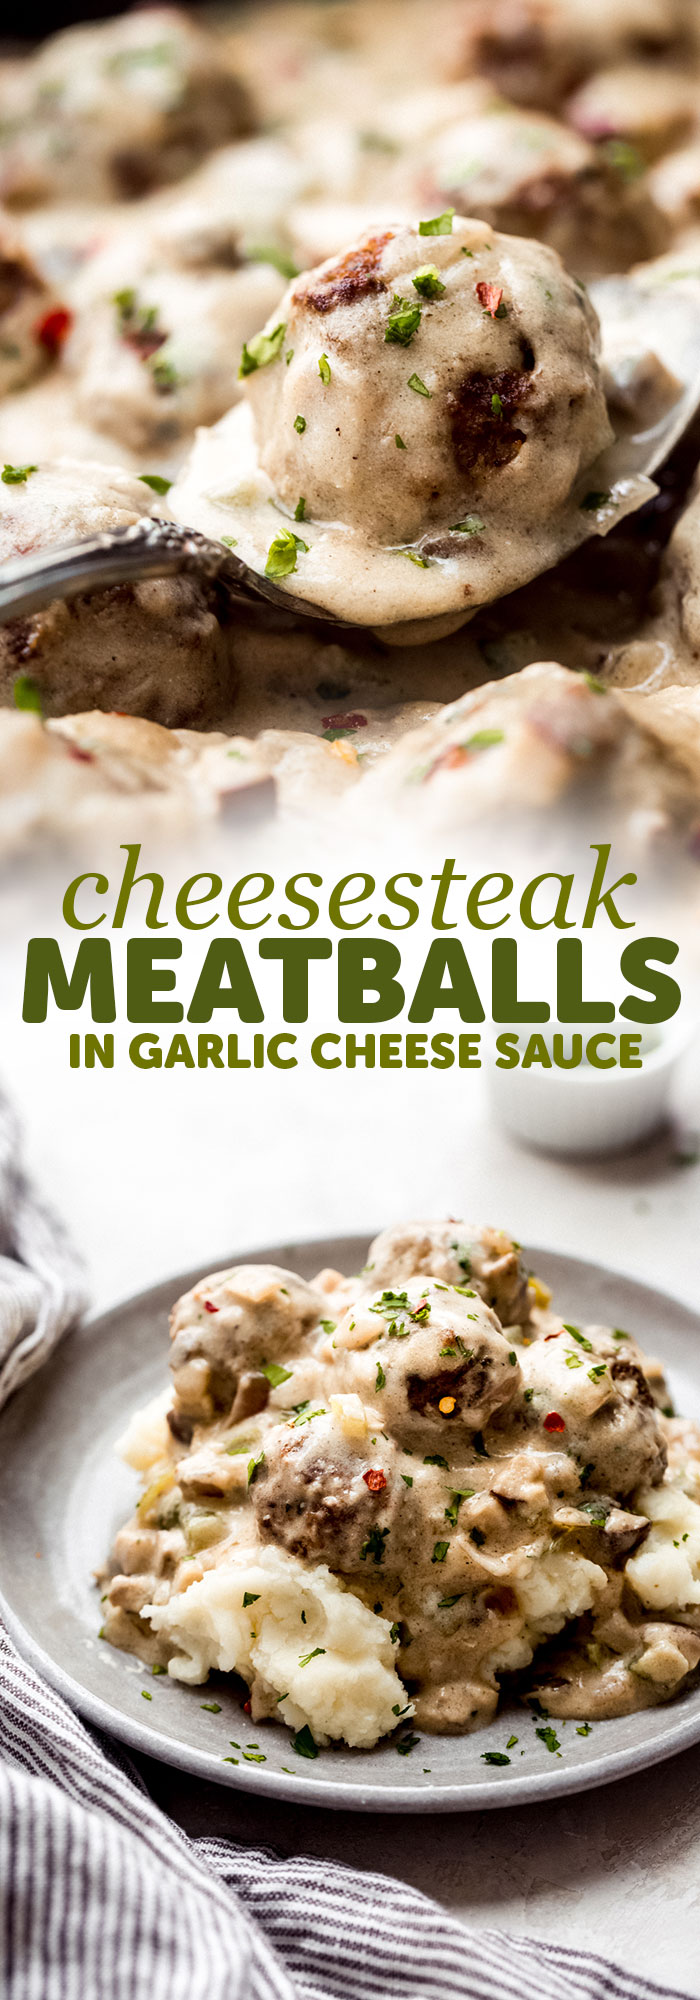 Cheesesteak Meatballs in Garlic Cheese Sauce - Learn how to make a delish twist on a classic! The sauce is so good you'll want to slurp it with a spoon! #meatballs #cheesesteak #cheesesteakmeatballs #phillycheesesteak #garliccreamsauce #comfortfood #dinnerrecipes | Littlespicejar.com